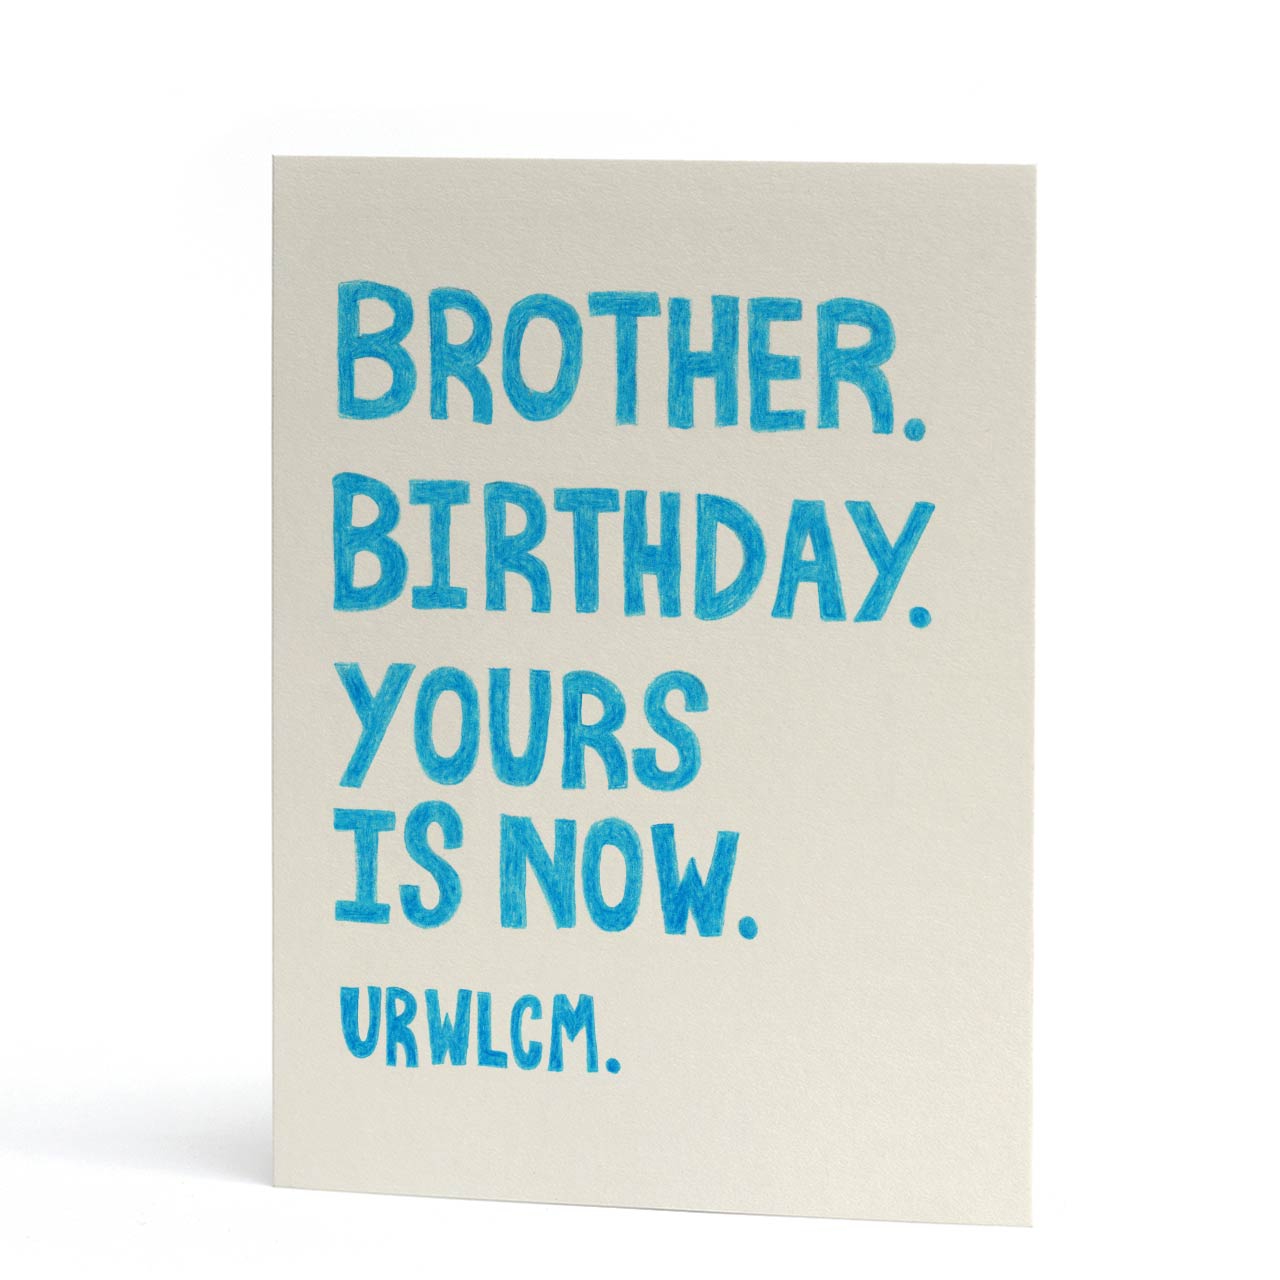 Brother. Birthday. Yours is Now Card